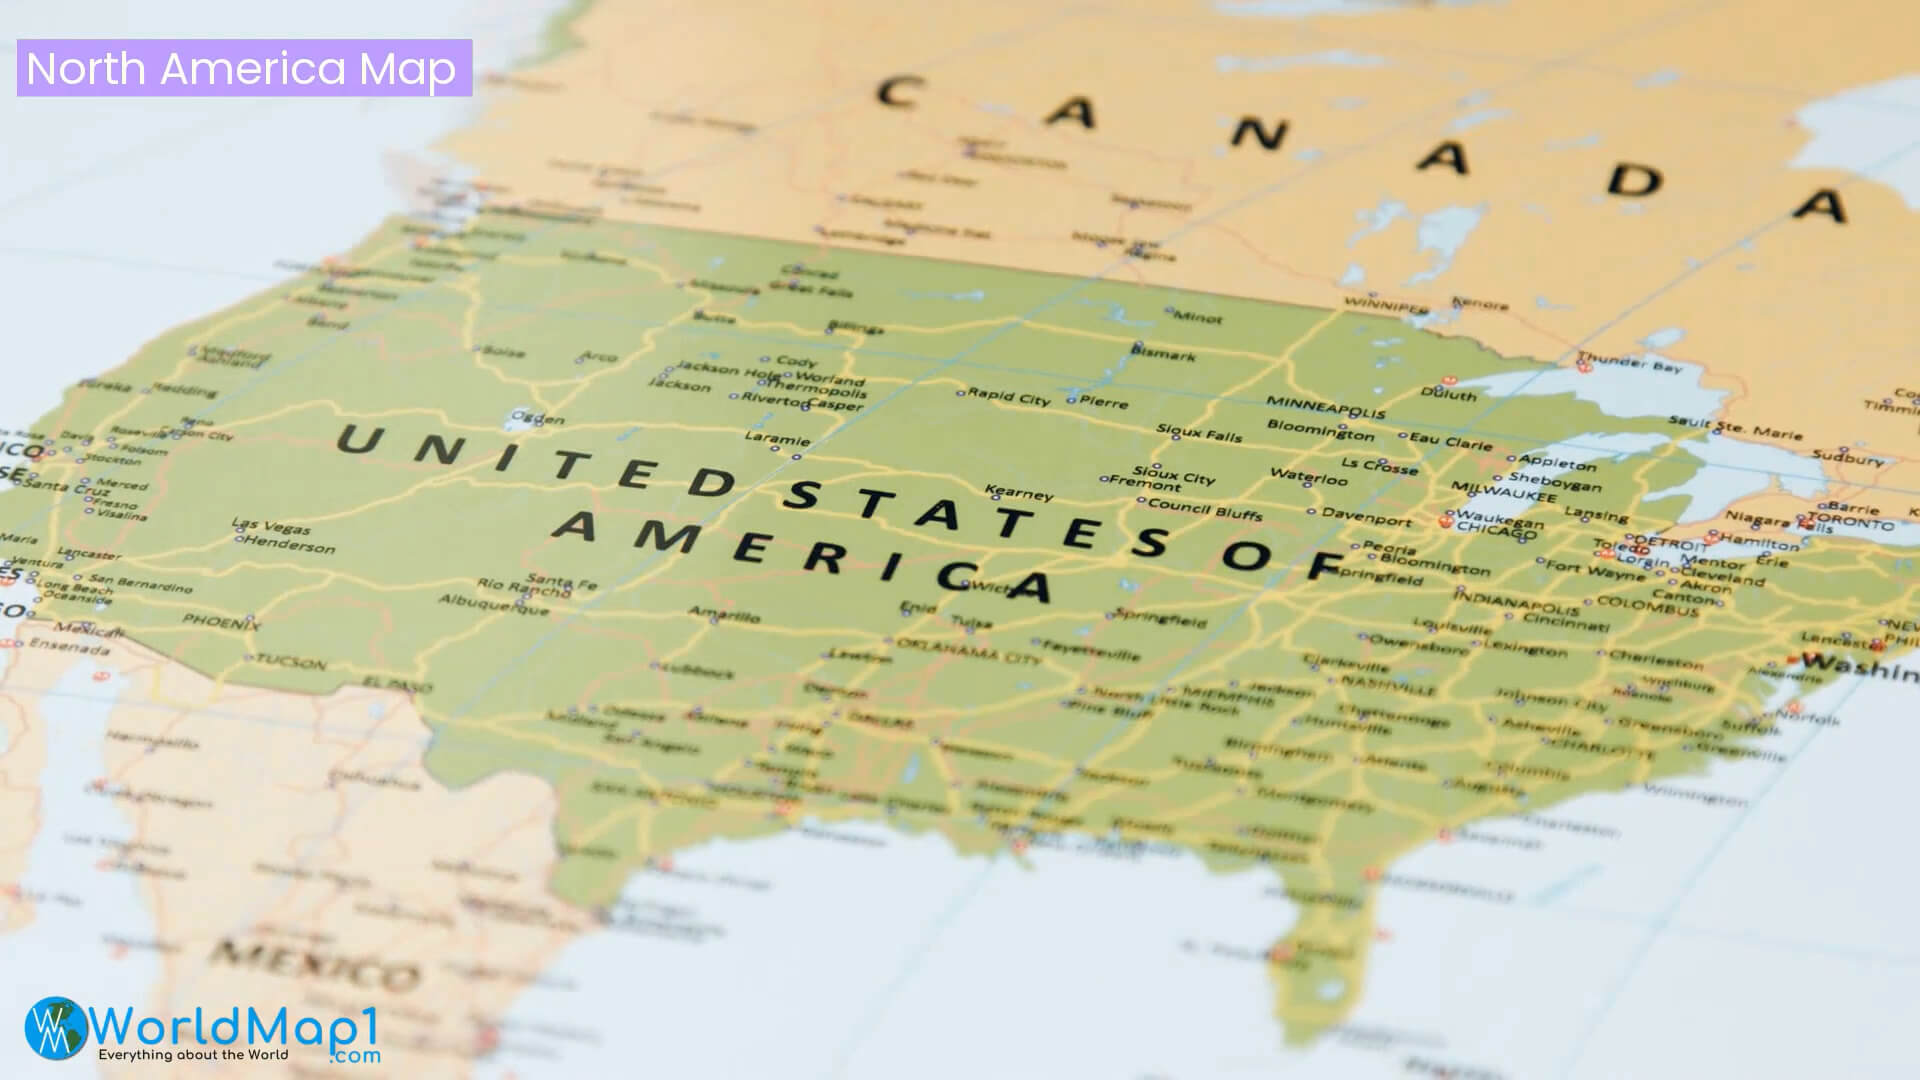 North America and United States of America Map